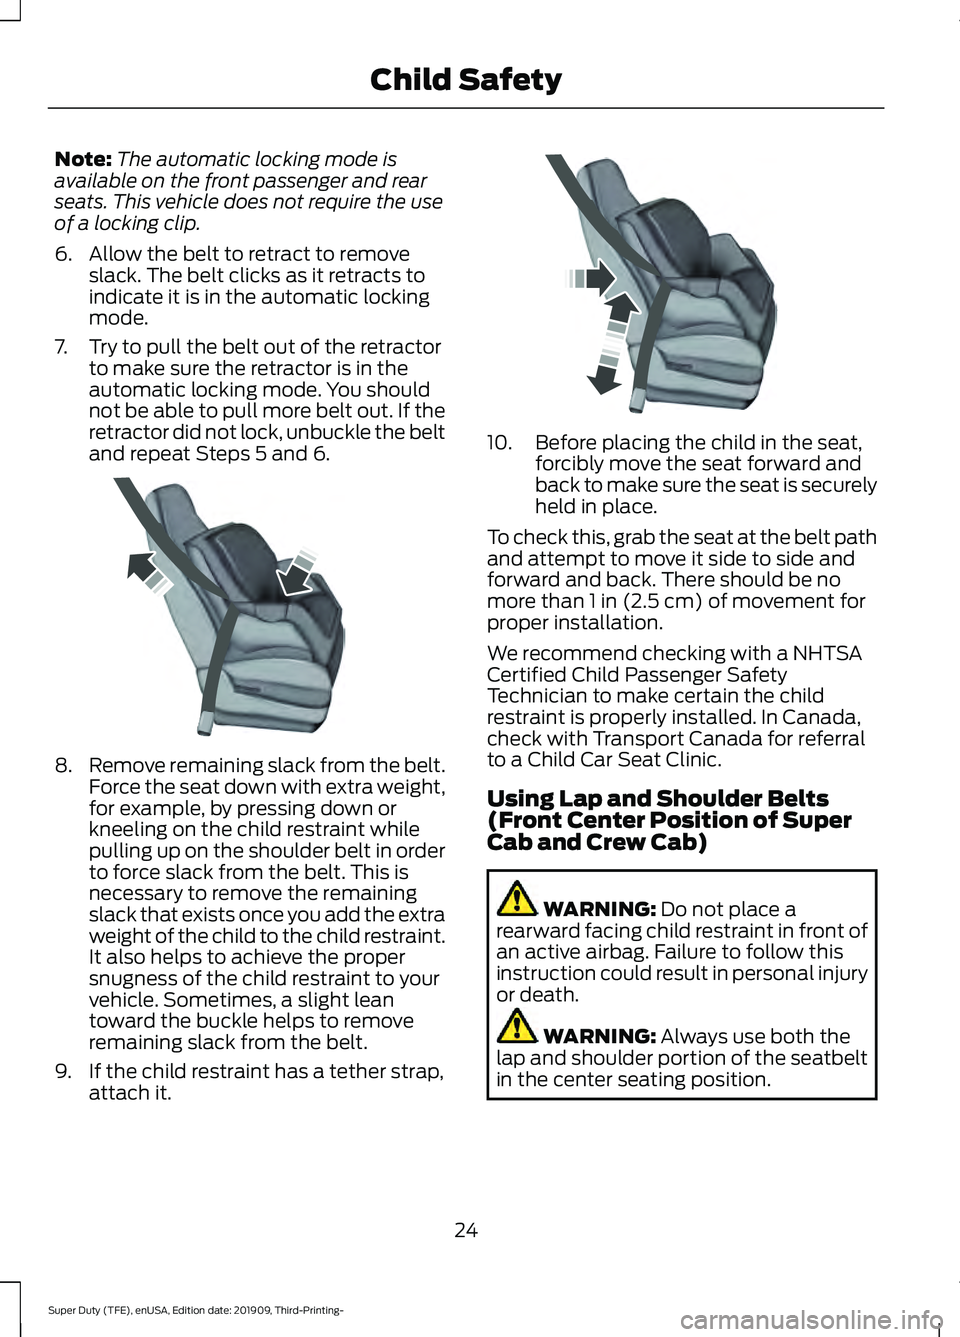 FORD F-250 2020  Owners Manual Note:
The automatic locking mode is
available on the front passenger and rear
seats. This vehicle does not require the use
of a locking clip.
6. Allow the belt to retract to remove slack. The belt cli